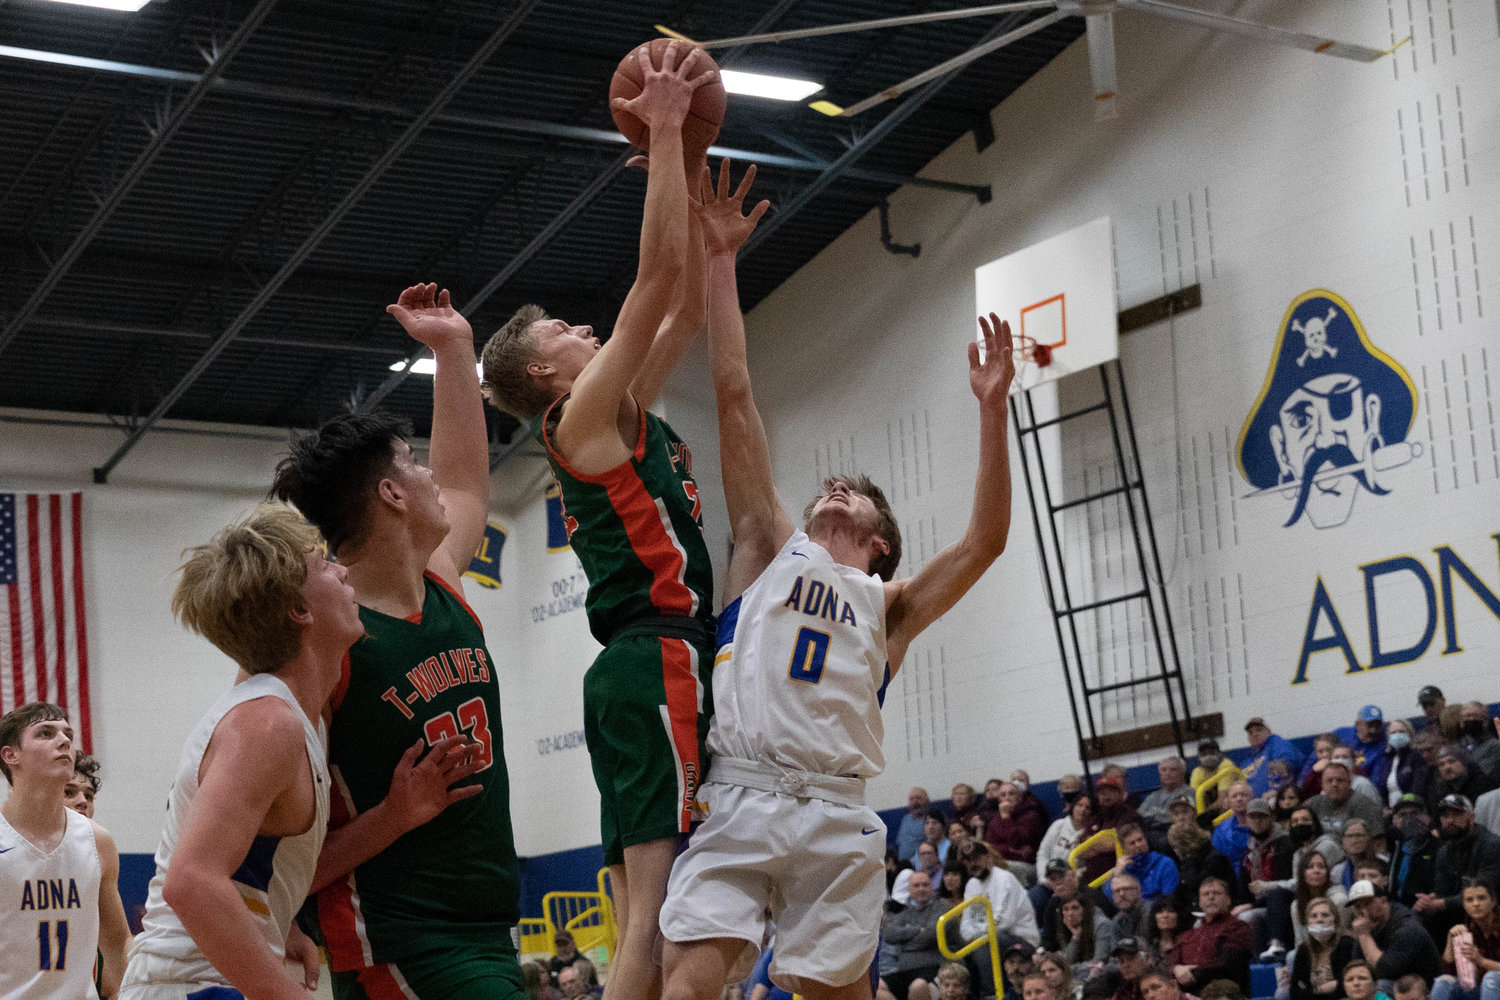 MWP forward Gary Dotson skies for a rebound against Adna's Aaron Aselton Jan. 28.